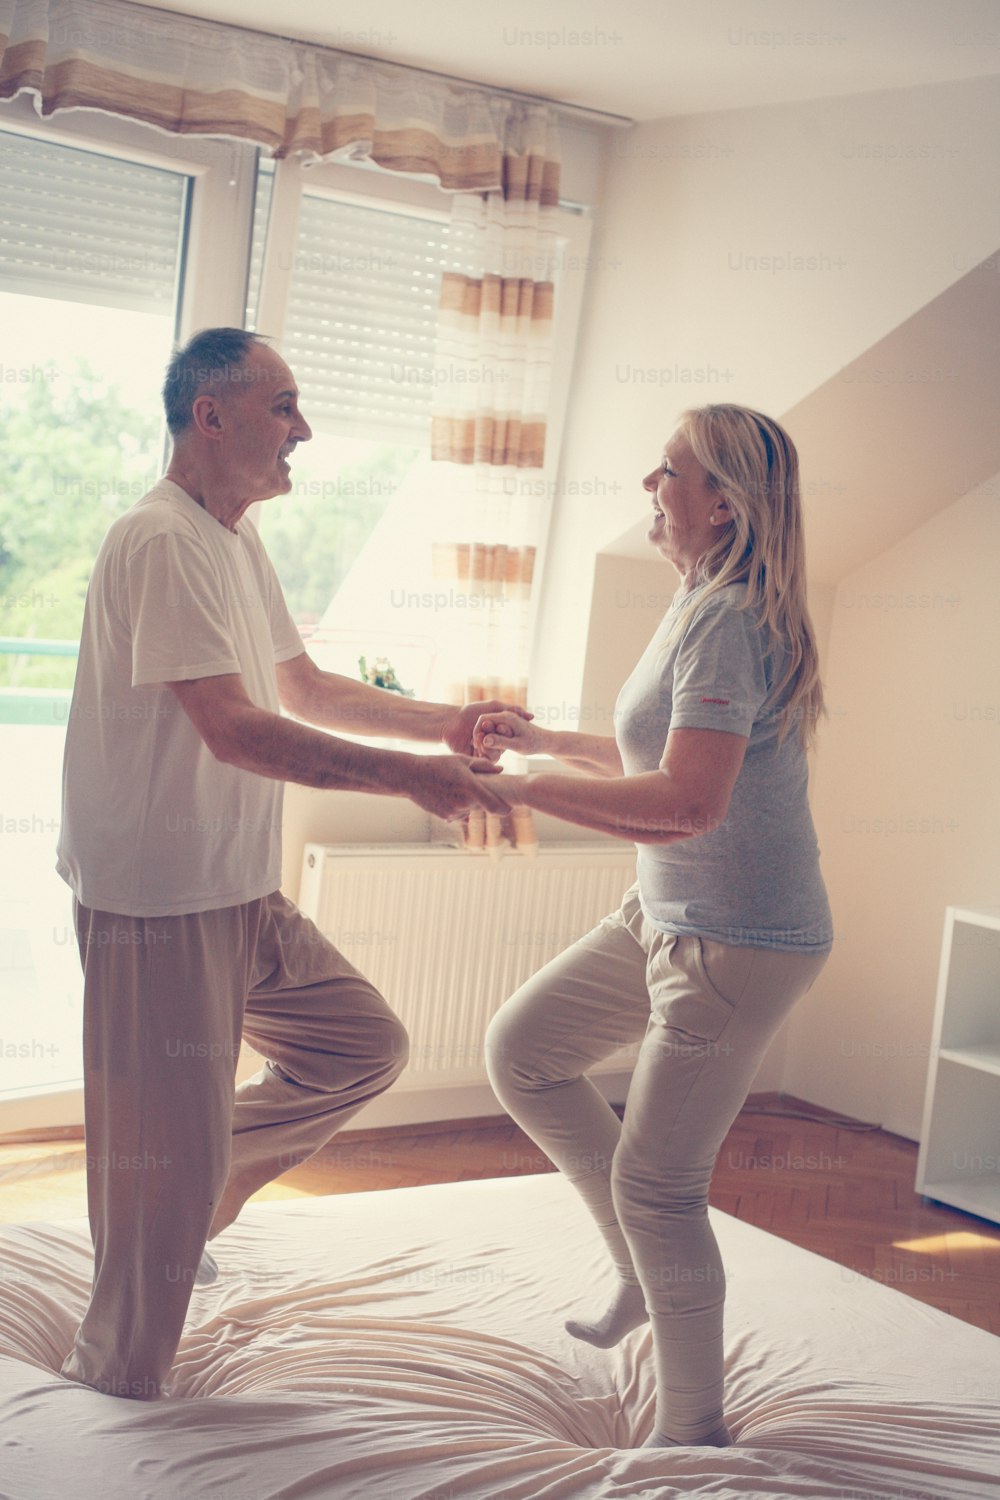 Senior couple dancing and jumping together on bed  holding hands.